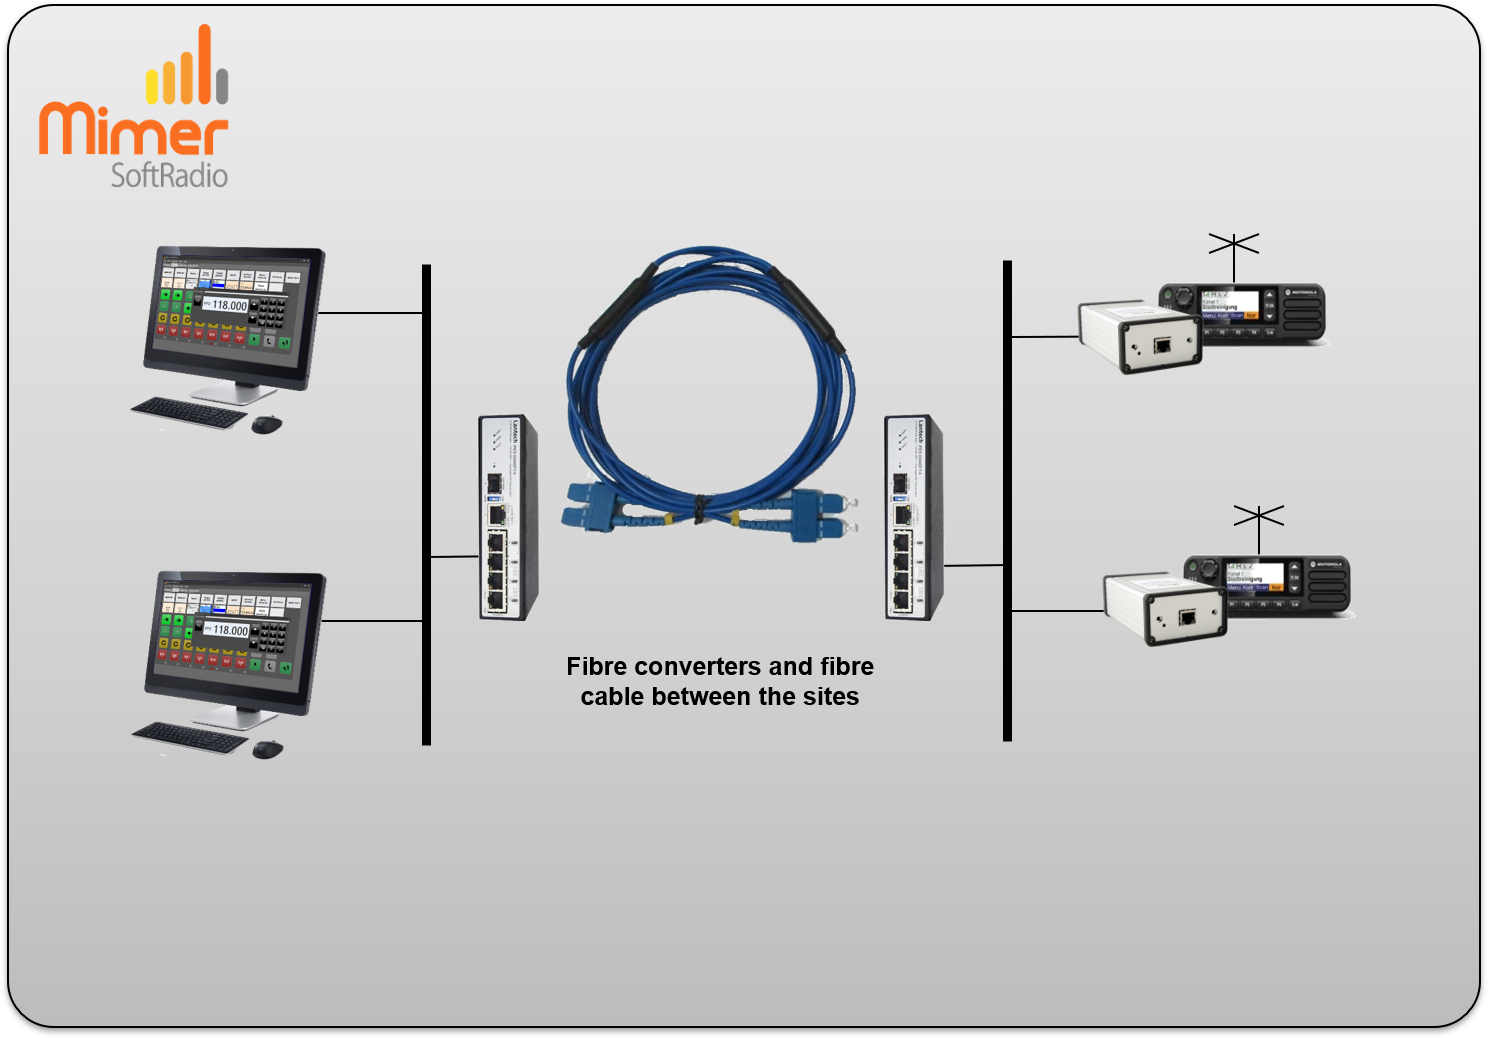 Using fibre to connect operator site with radio site